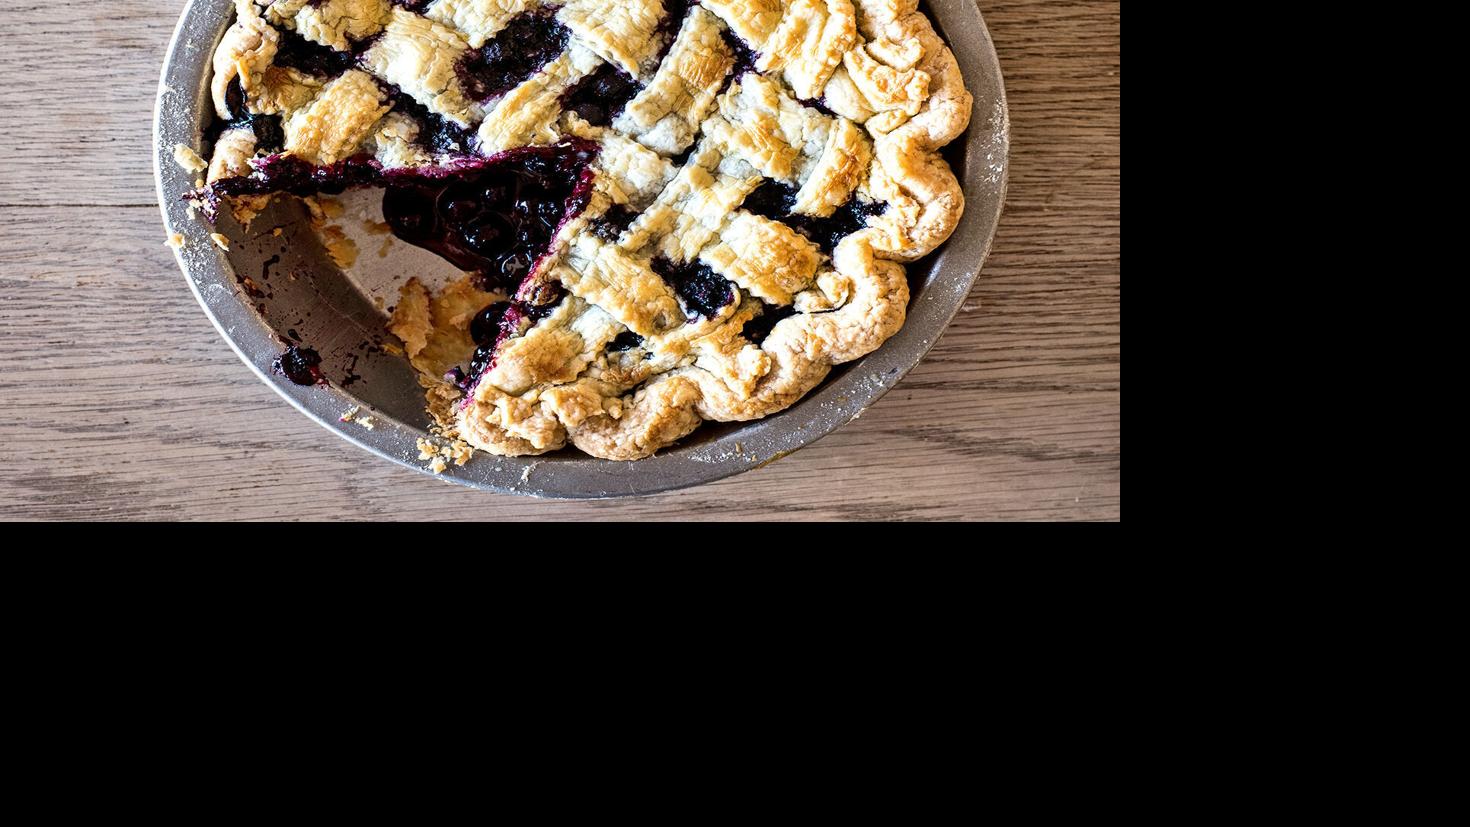 Fresh Blueberry Pie | Feast and Field: Food Begins in the Field | journalstar.com